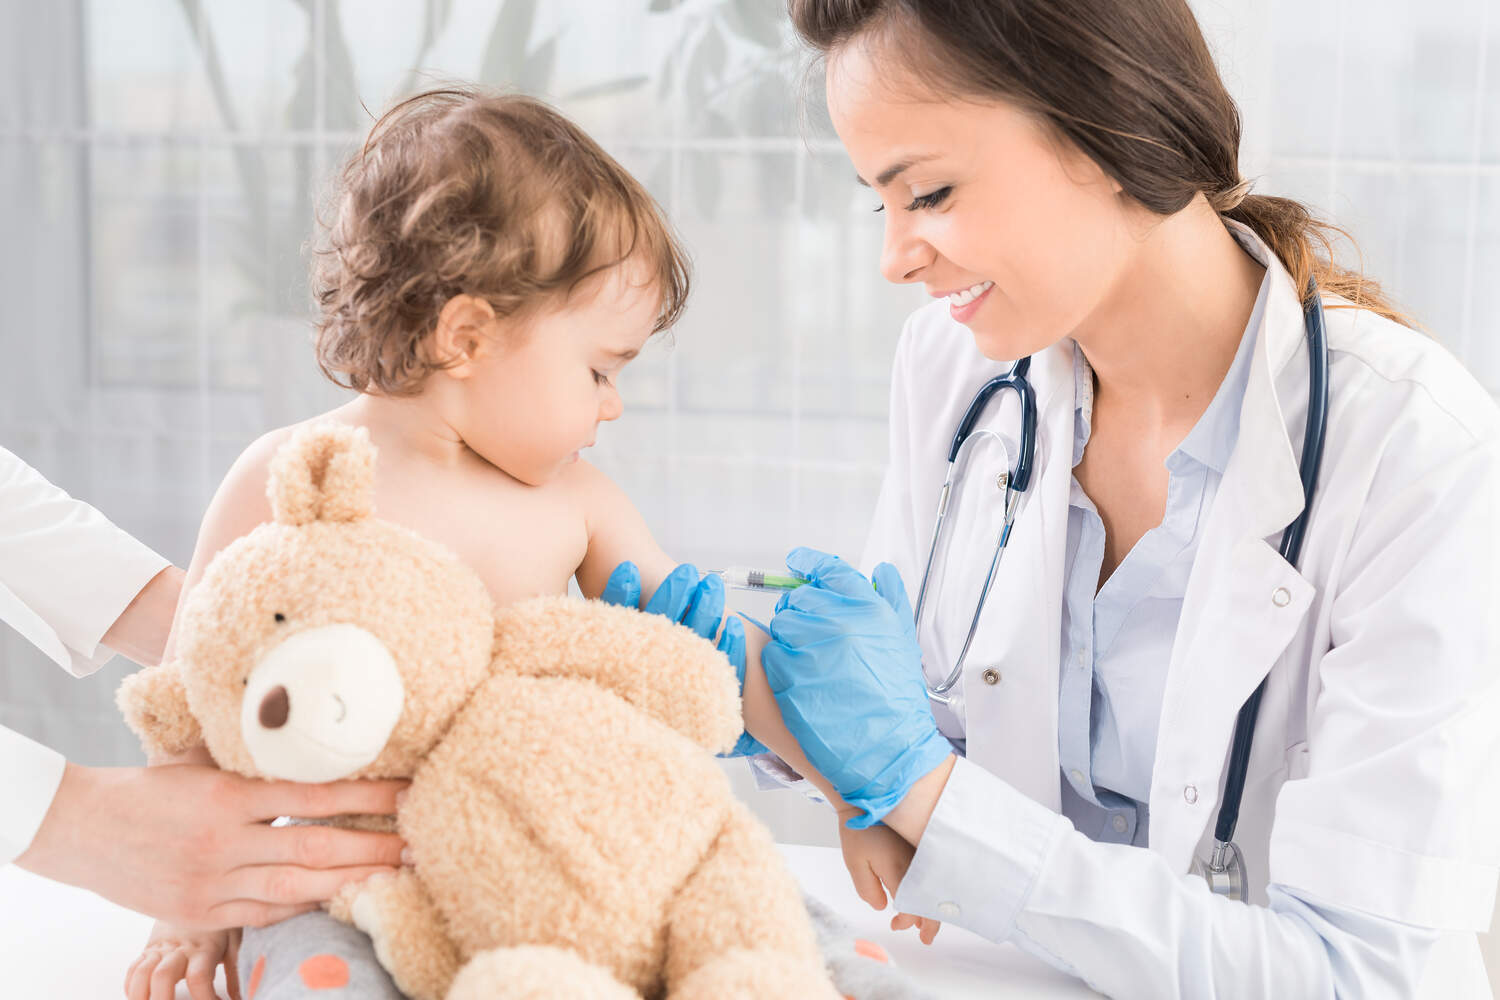 A toddler holding teddy bear and getting injected